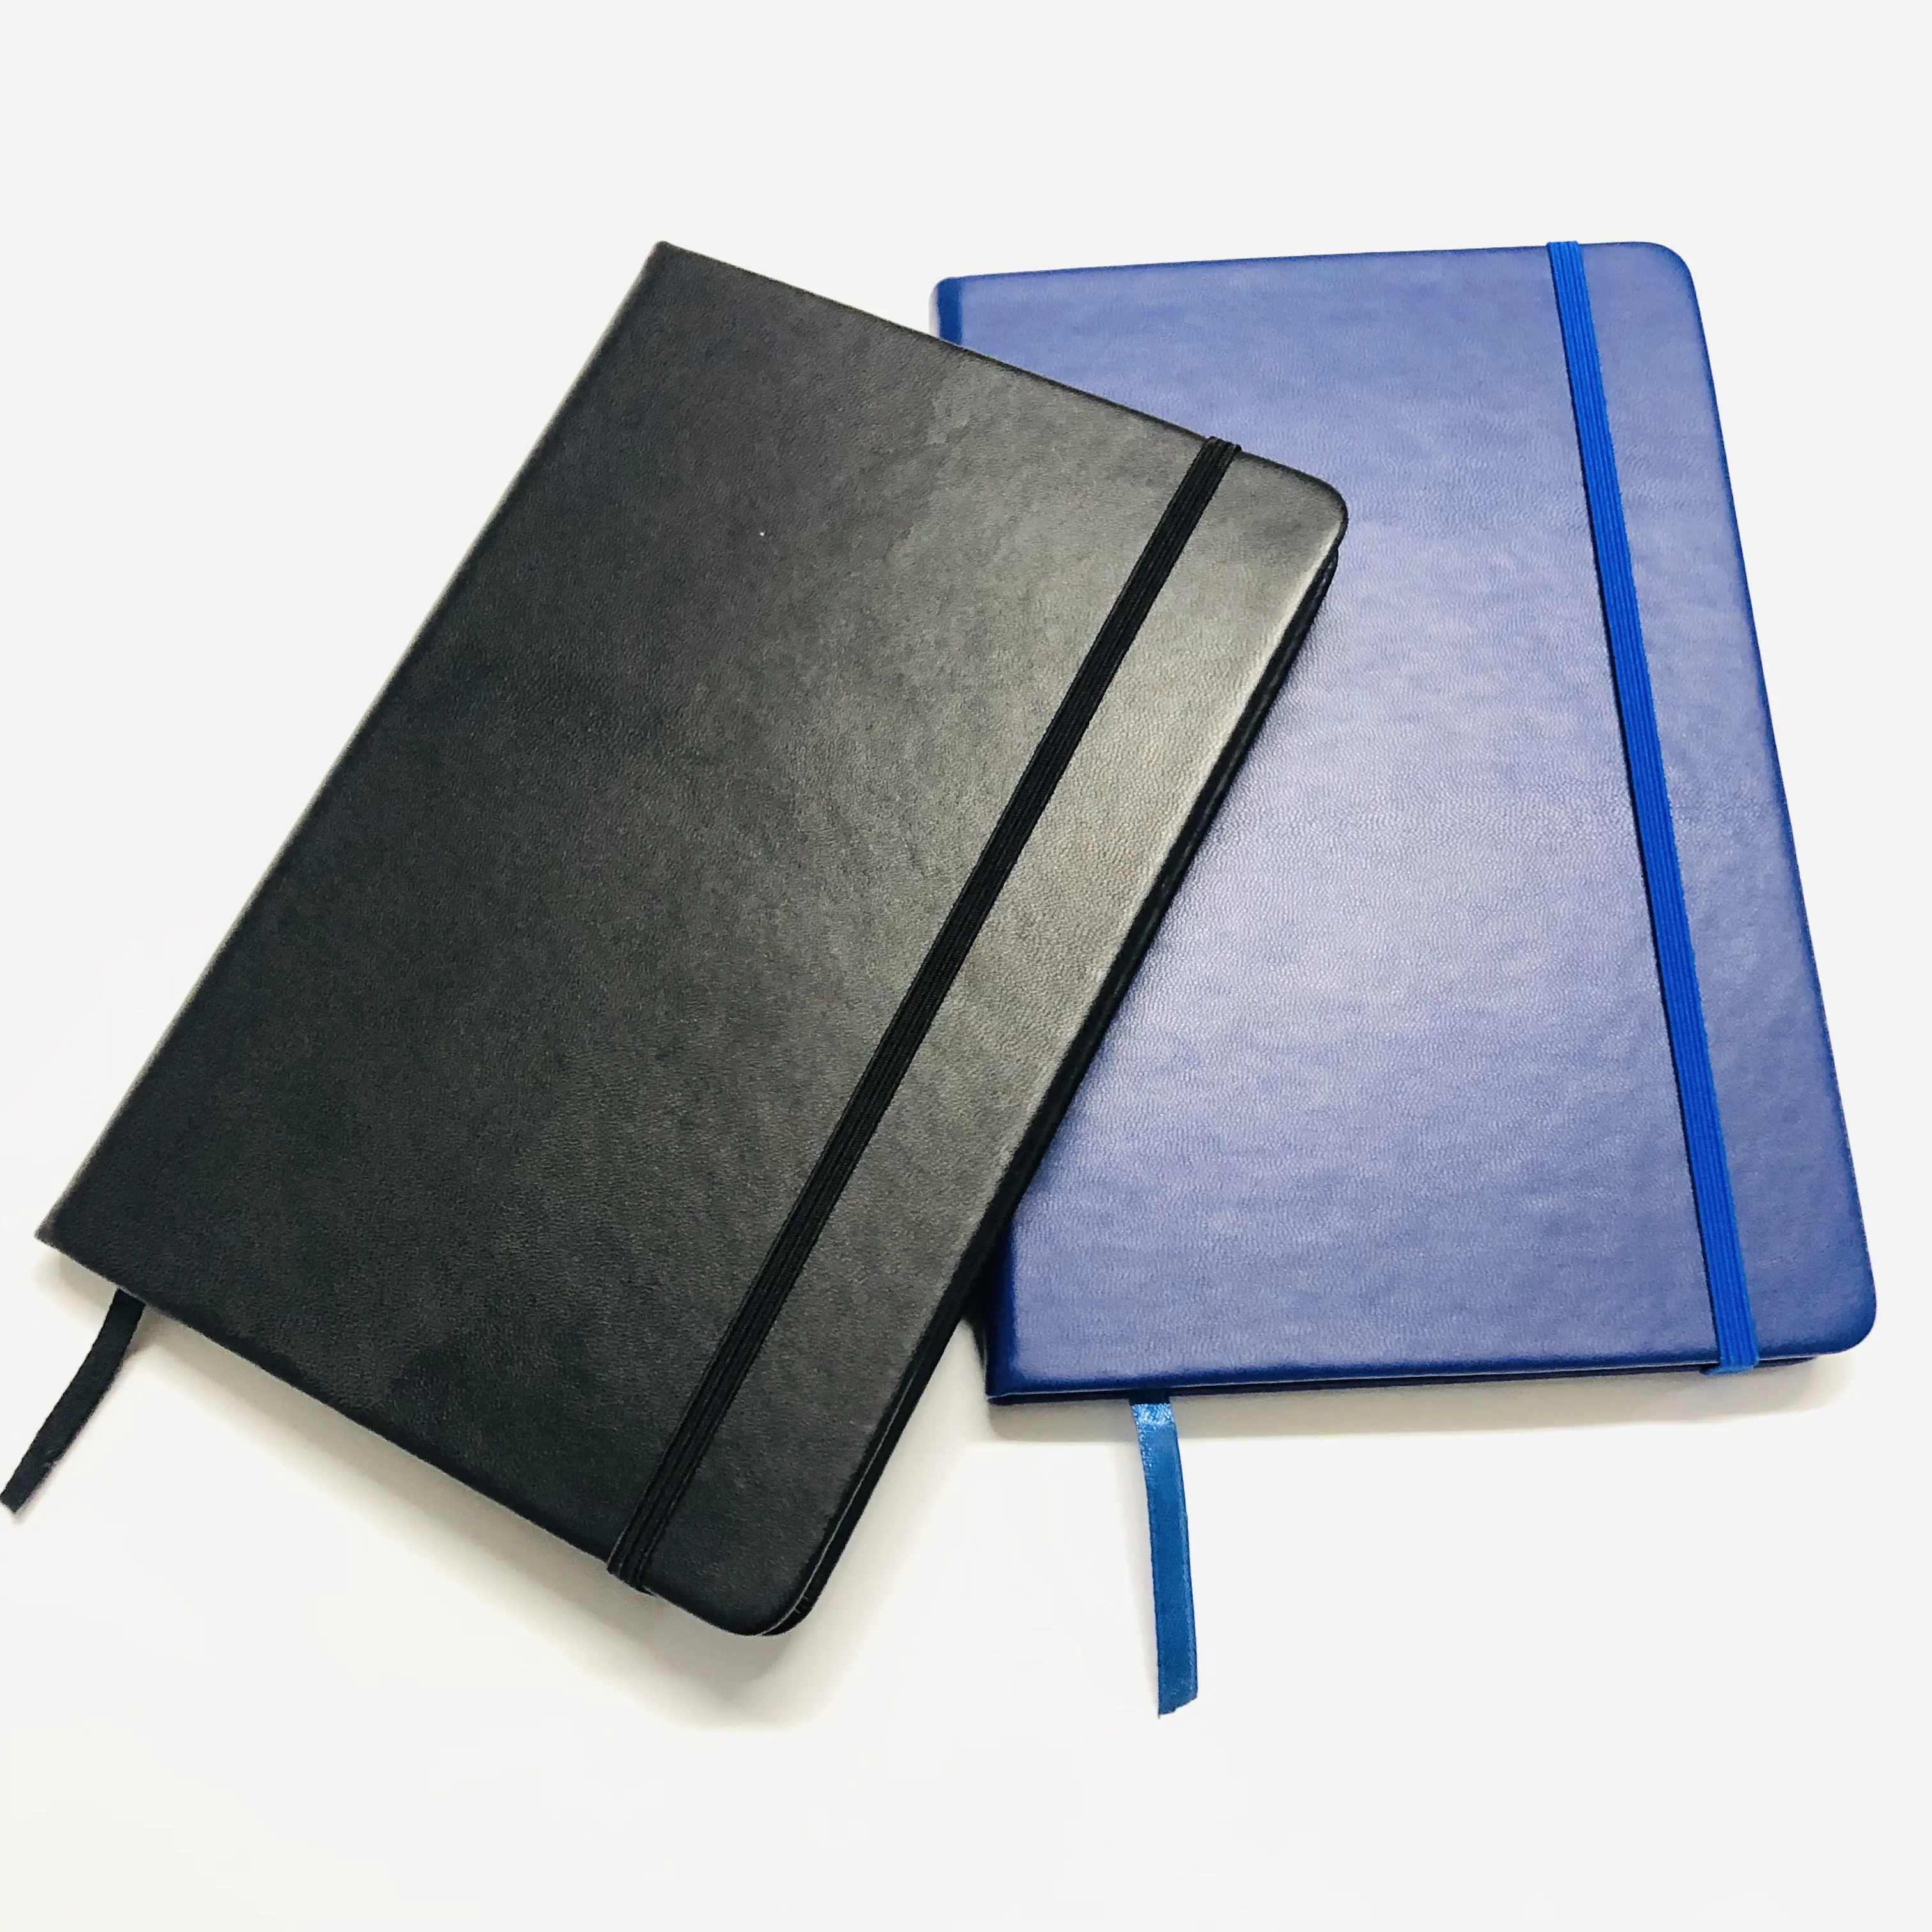 Free sample 100 Sheets line paper Promotion gifts a5 pu leather hardcover notebook with elastic